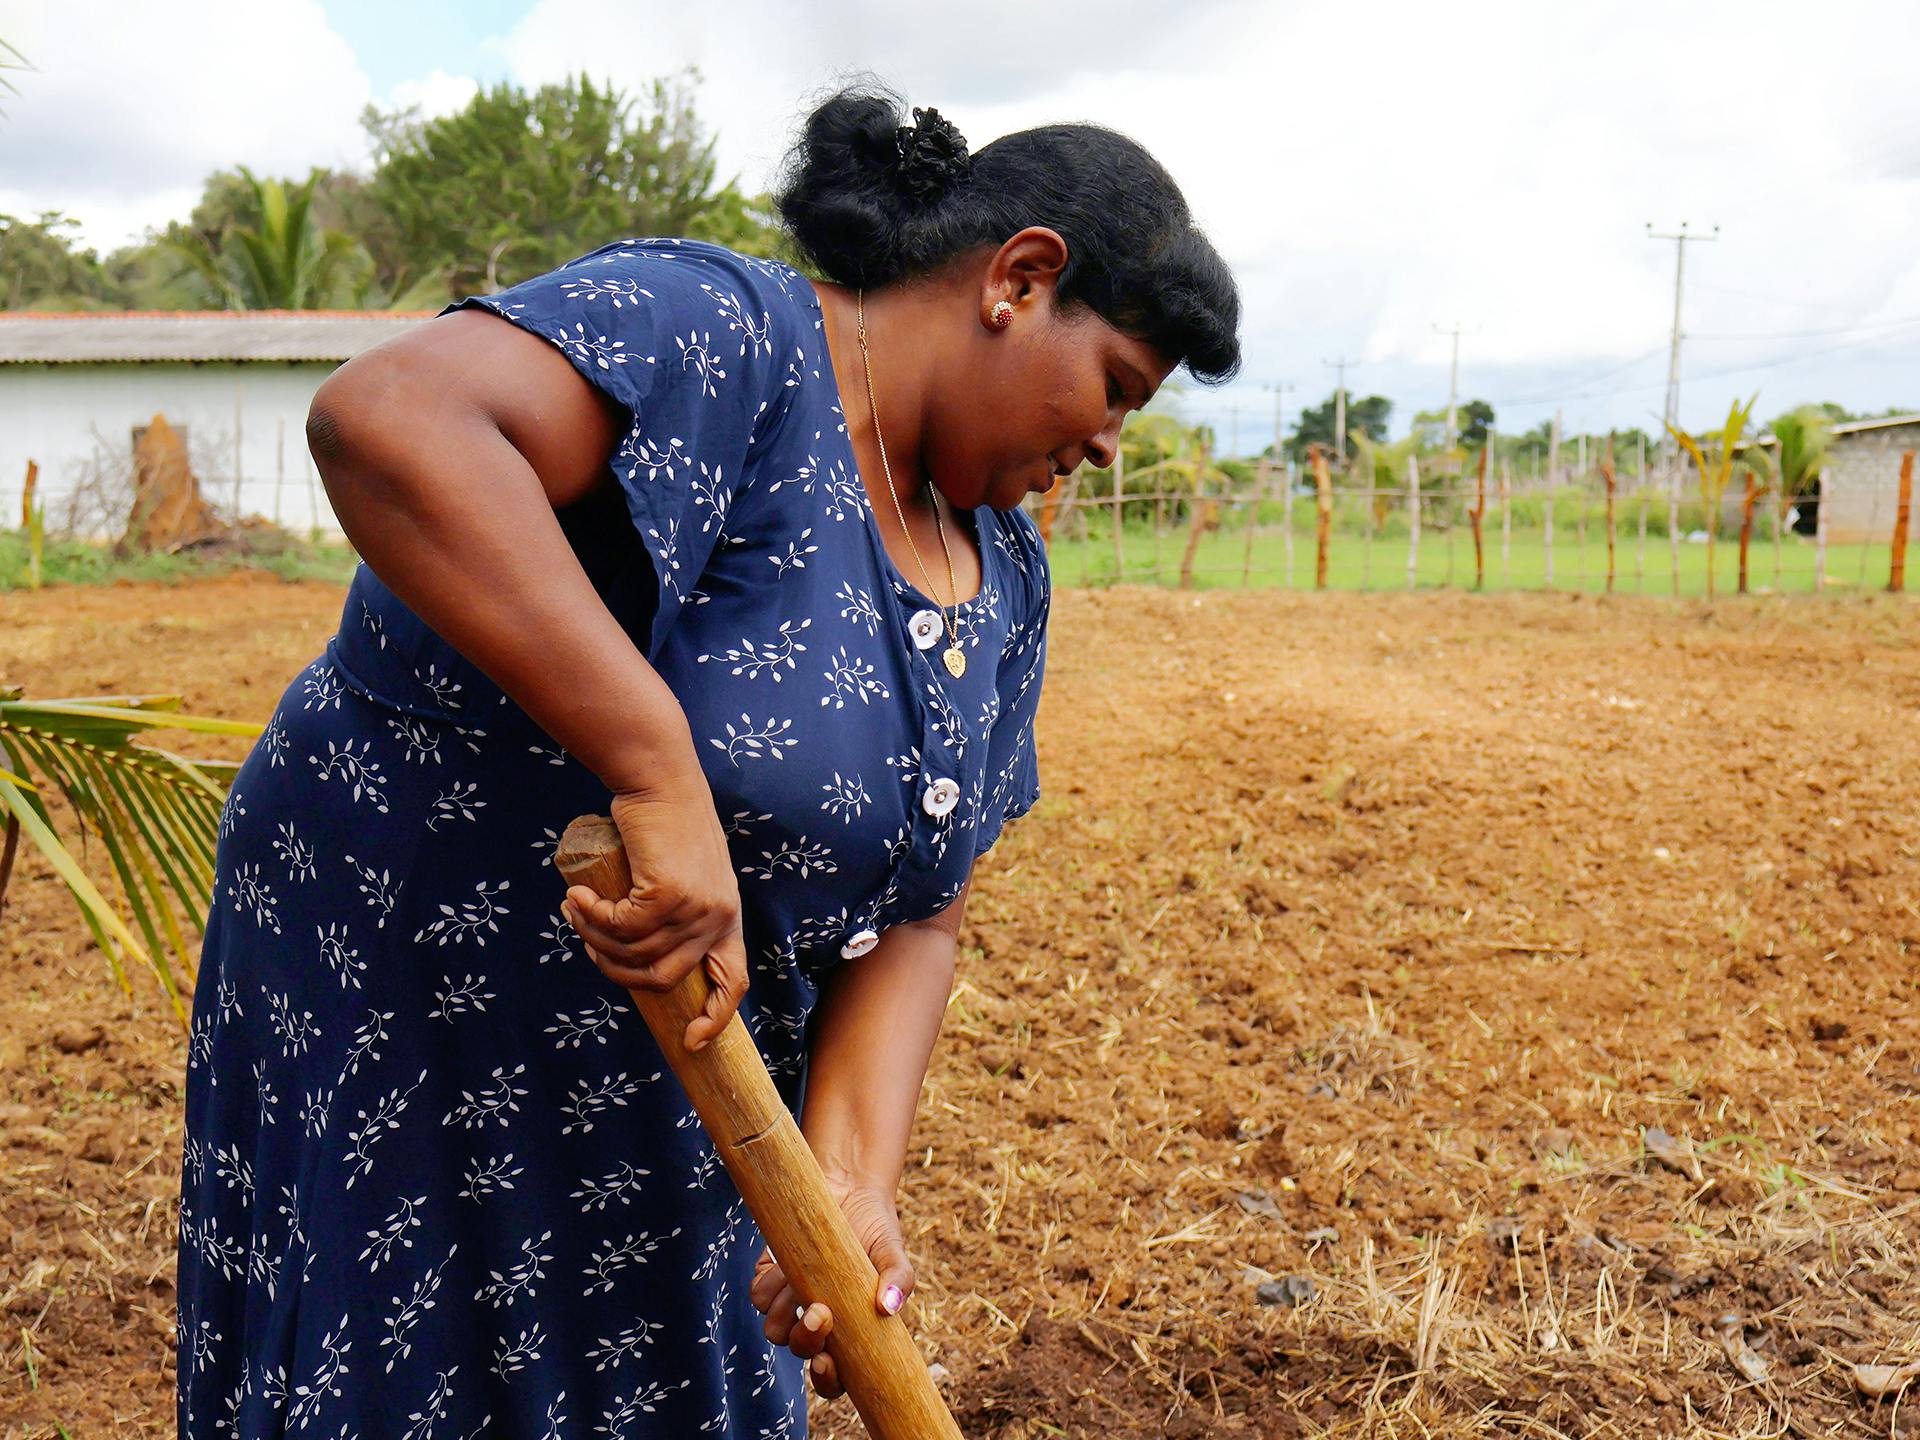 A woman in a blue dress working with a tool in a field.